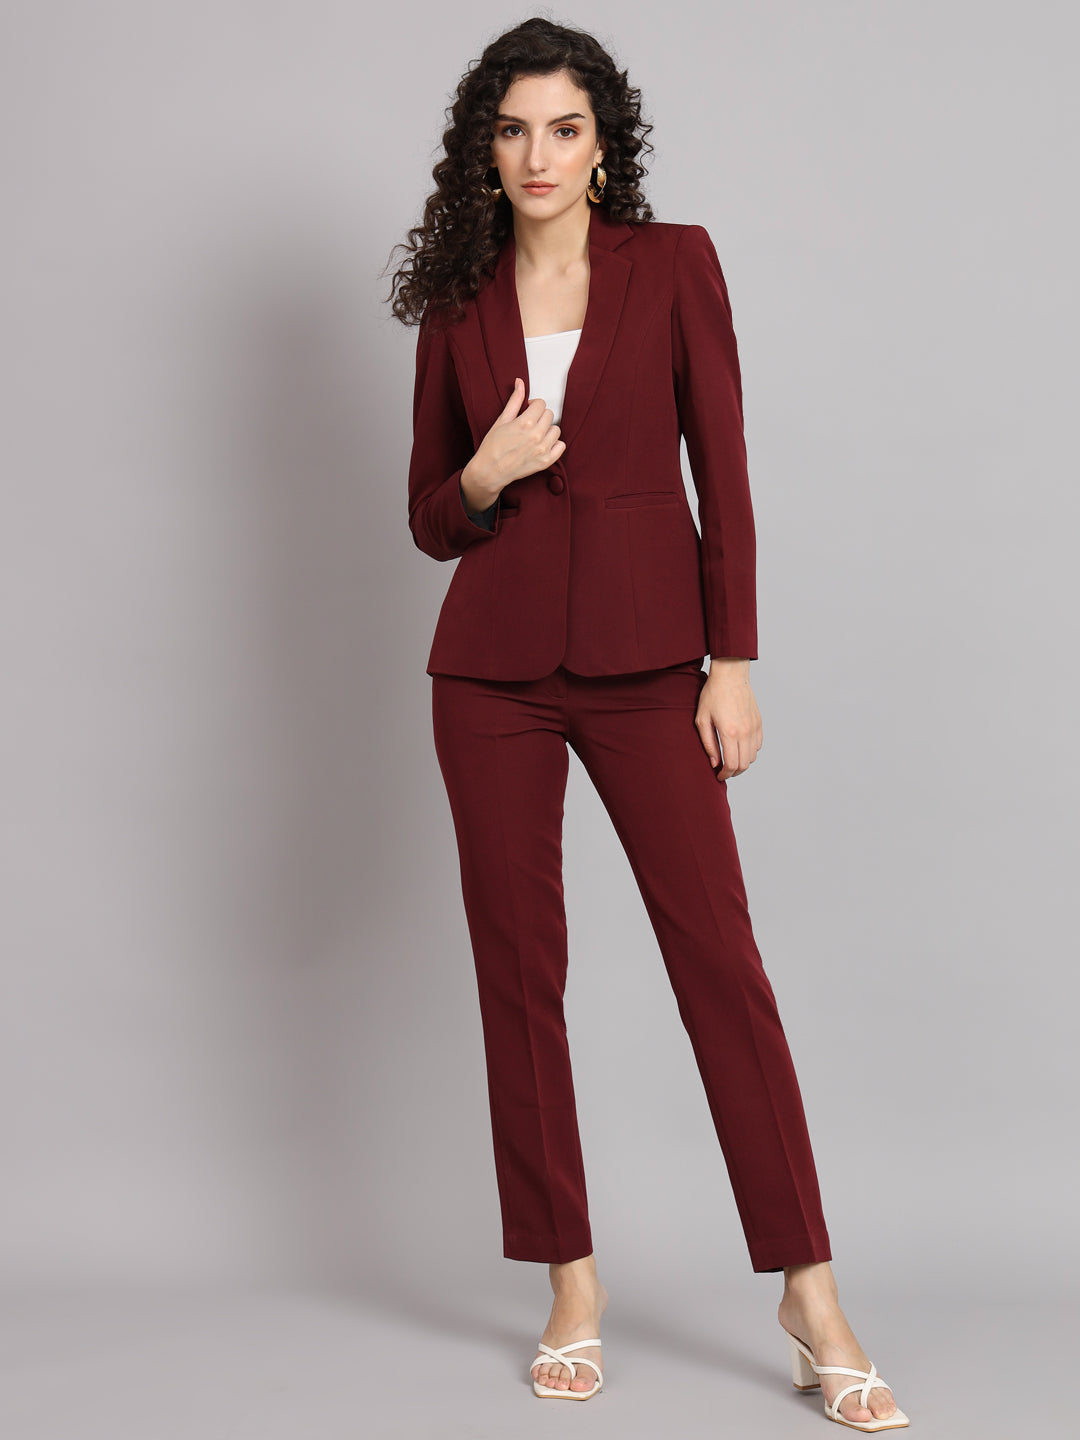 Notched Collar Stretch Pant Suit - Maroon